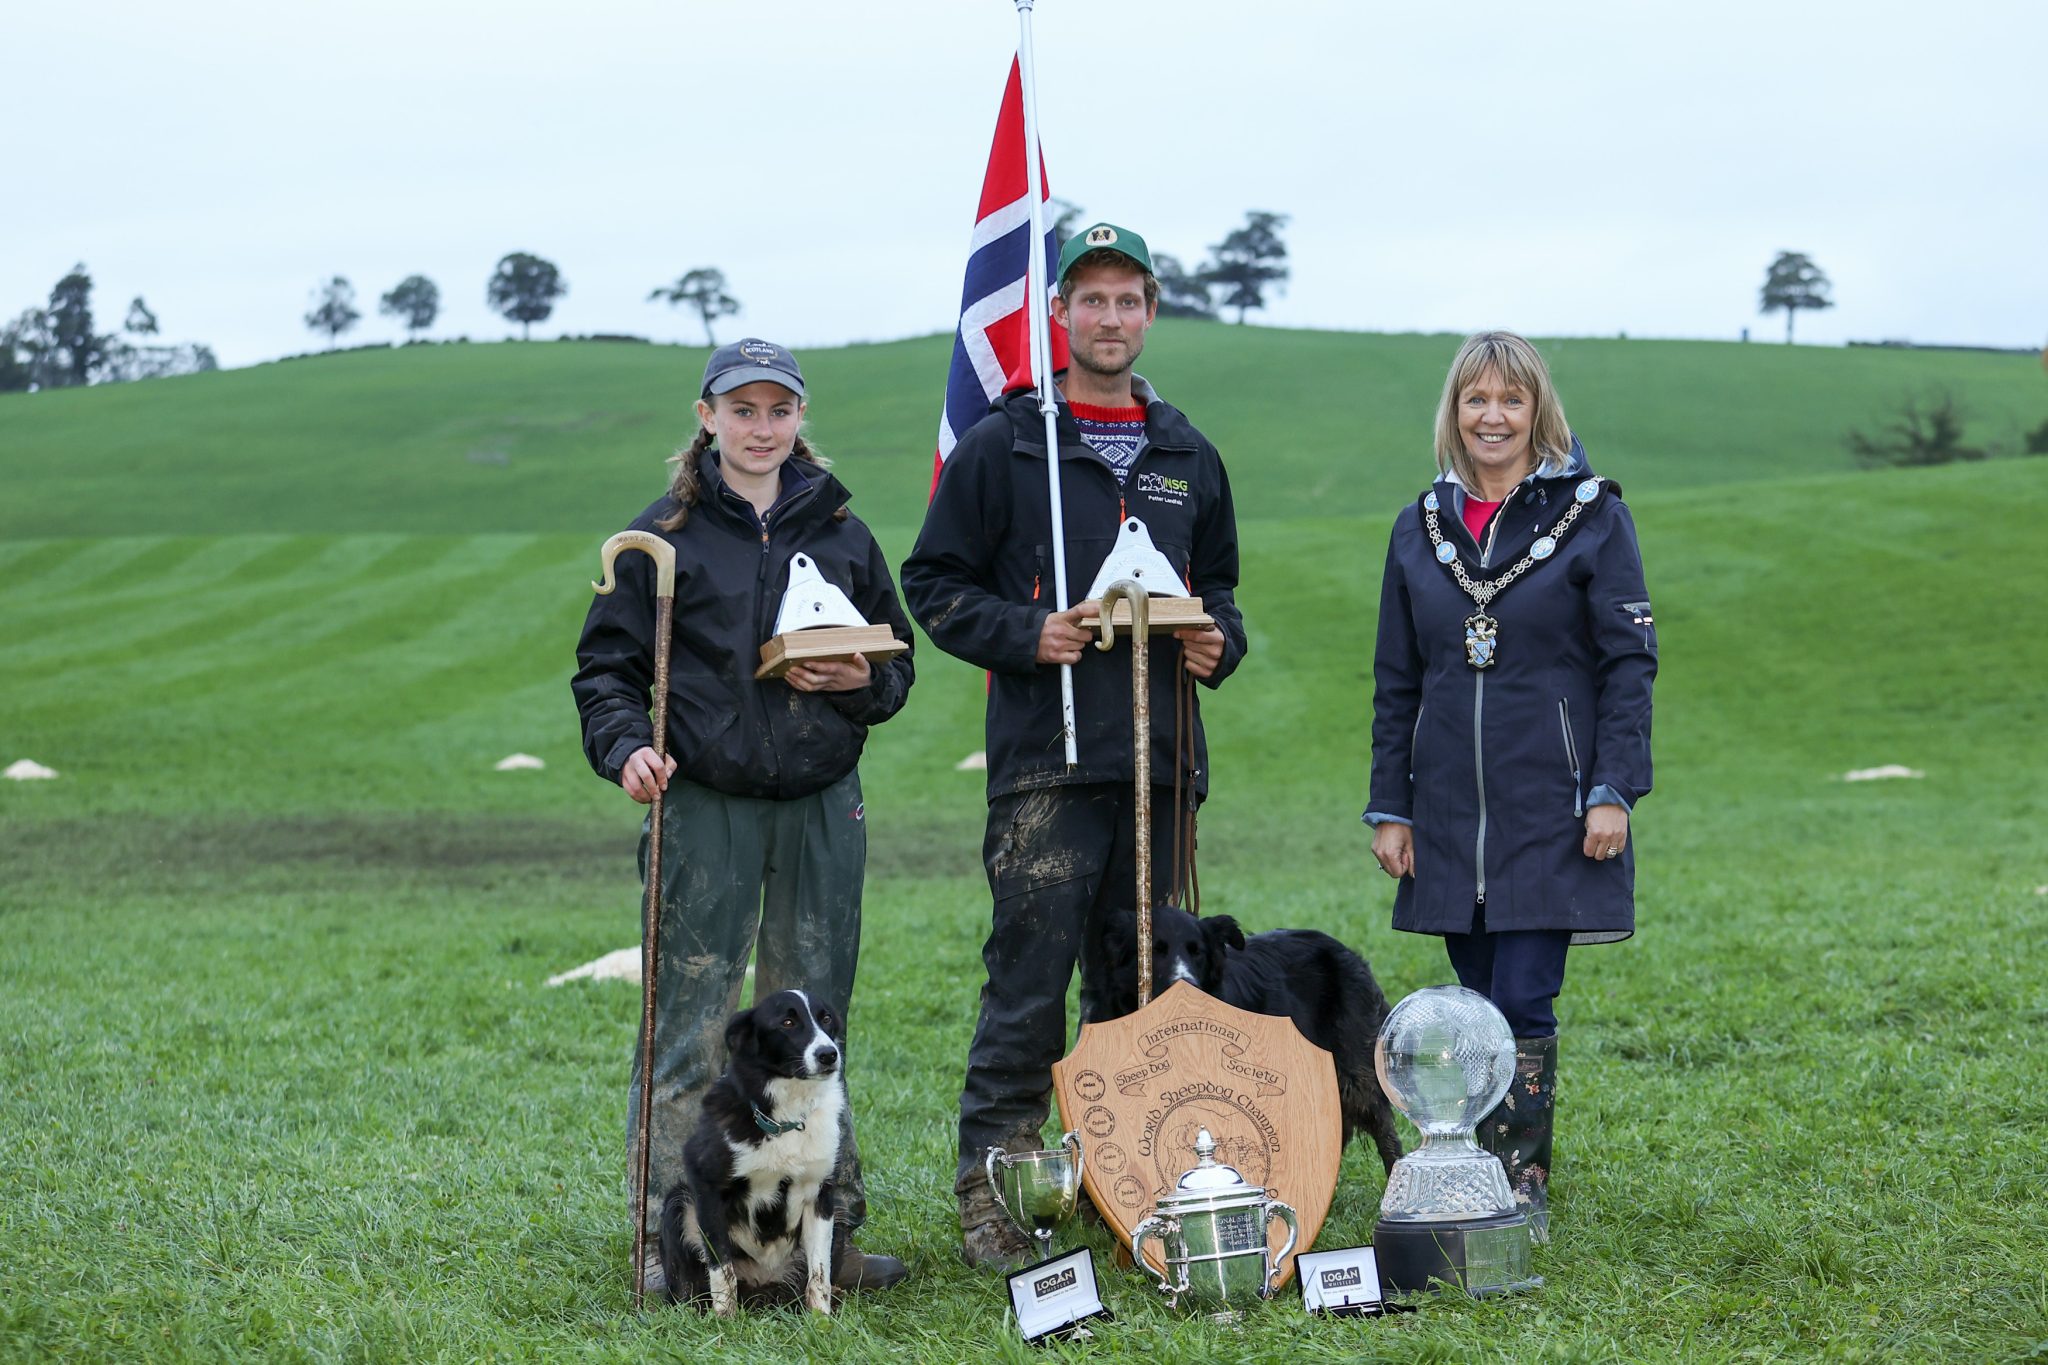 Planet Sheepdog Champions Praised by Lord Mayor